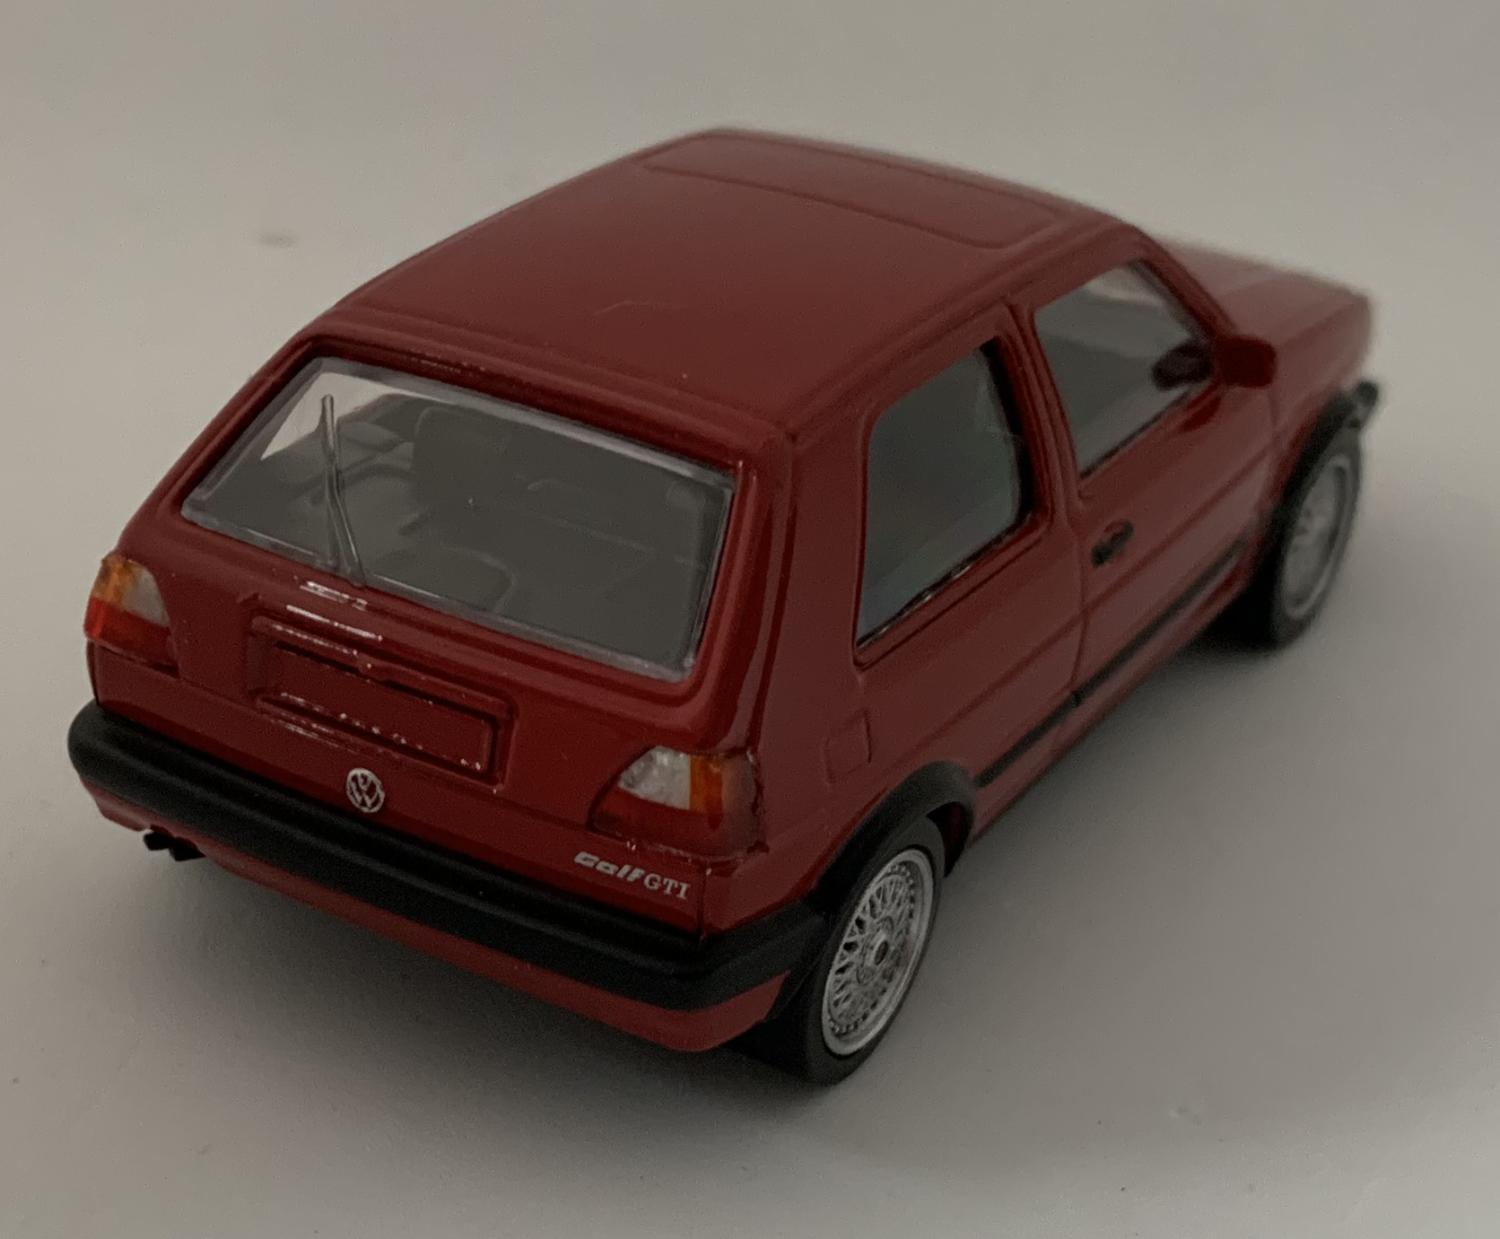 A good replica of the VW Golf GTI decorated in red with silver wheels.